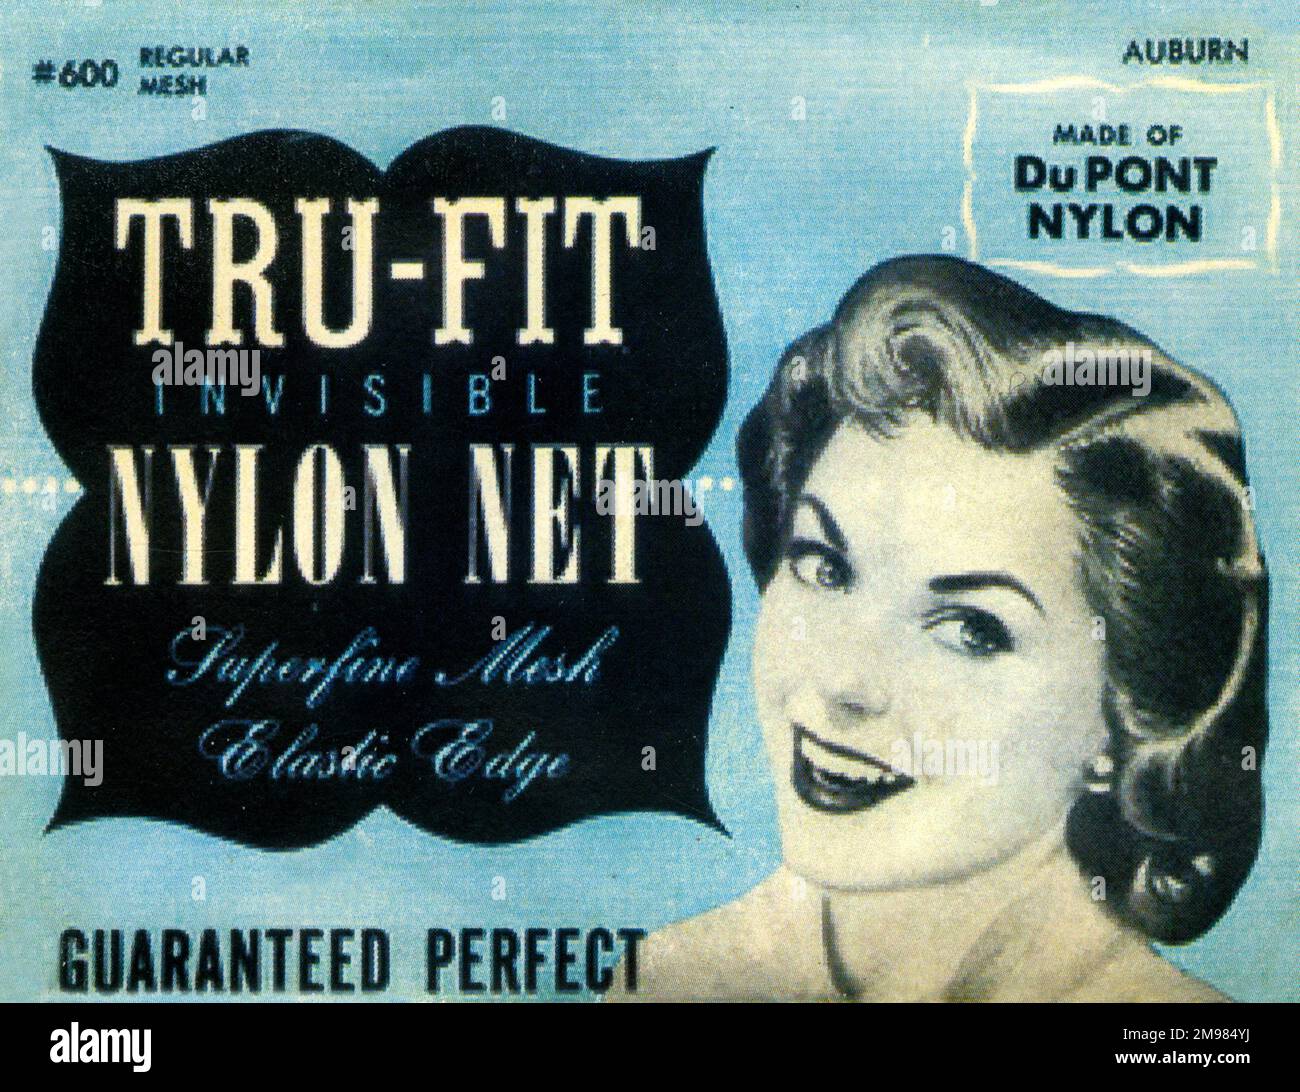 Vintage Hairnet Packaging - Tru-fit Invisible Nylon Net with Superfine Mesh and Elastic Edge - made of DuPont nylon in Auburn - 'Guaranteed perfect'! Stock Photo